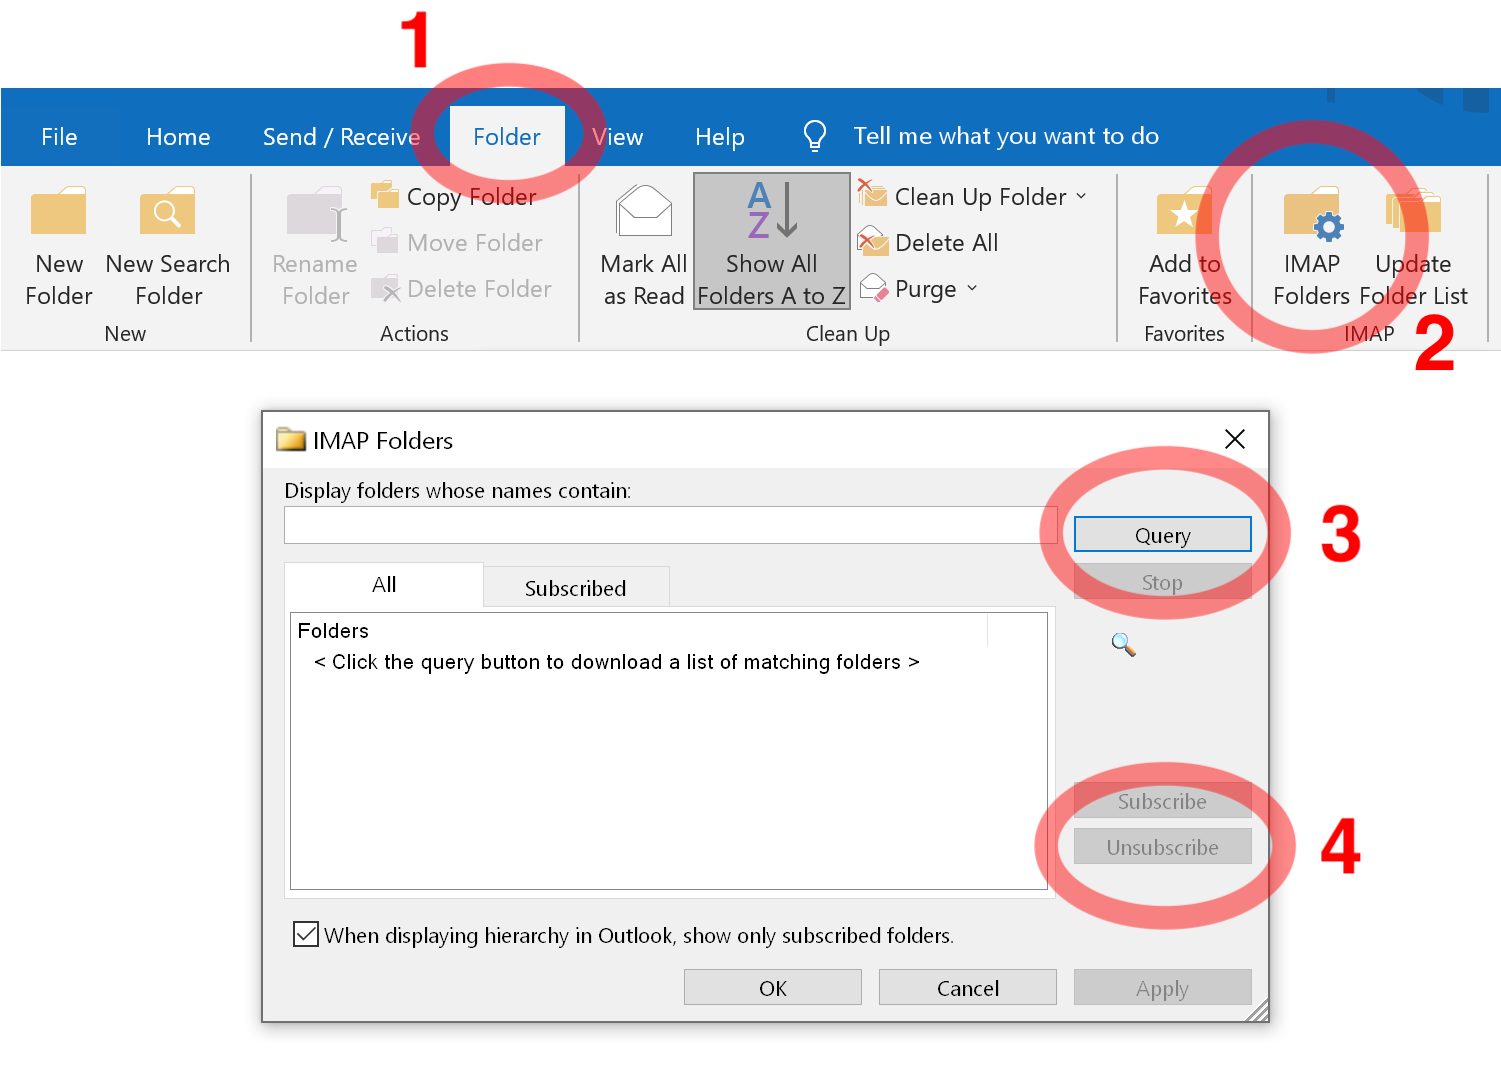 Unsubscribing from Outlook folders